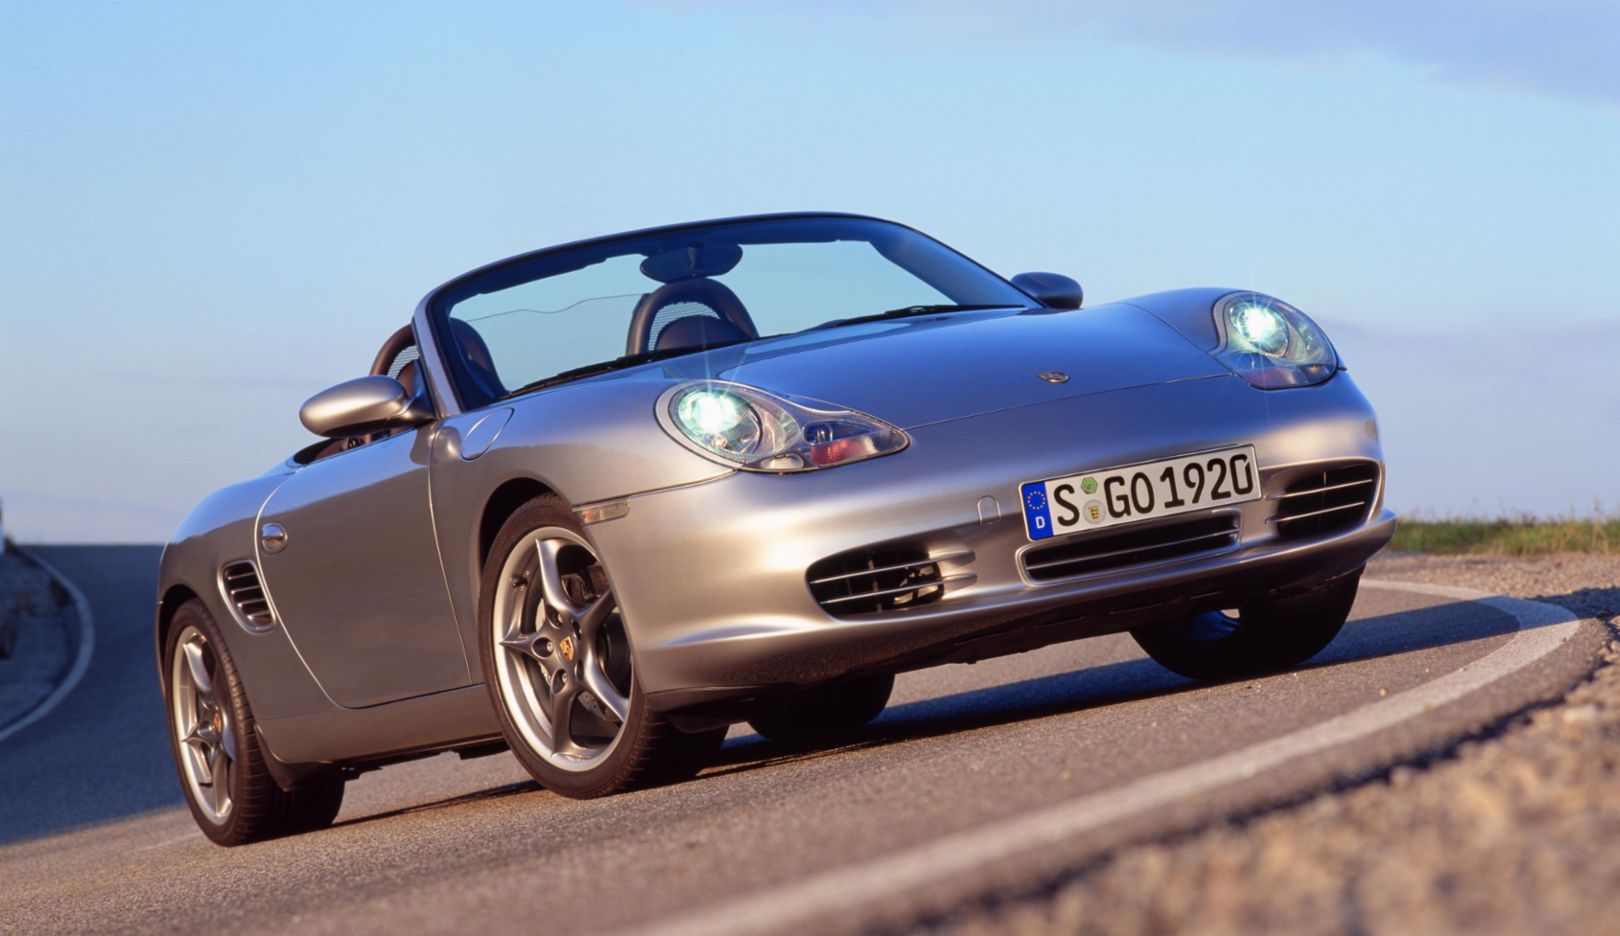 986 generation: 50 years of the 550 Spyder special edition (2004). In 2004 – the last model year of the first generation – the special edition “50 Years of the 550 Spyder” is launched, limited to 1,953 units. 